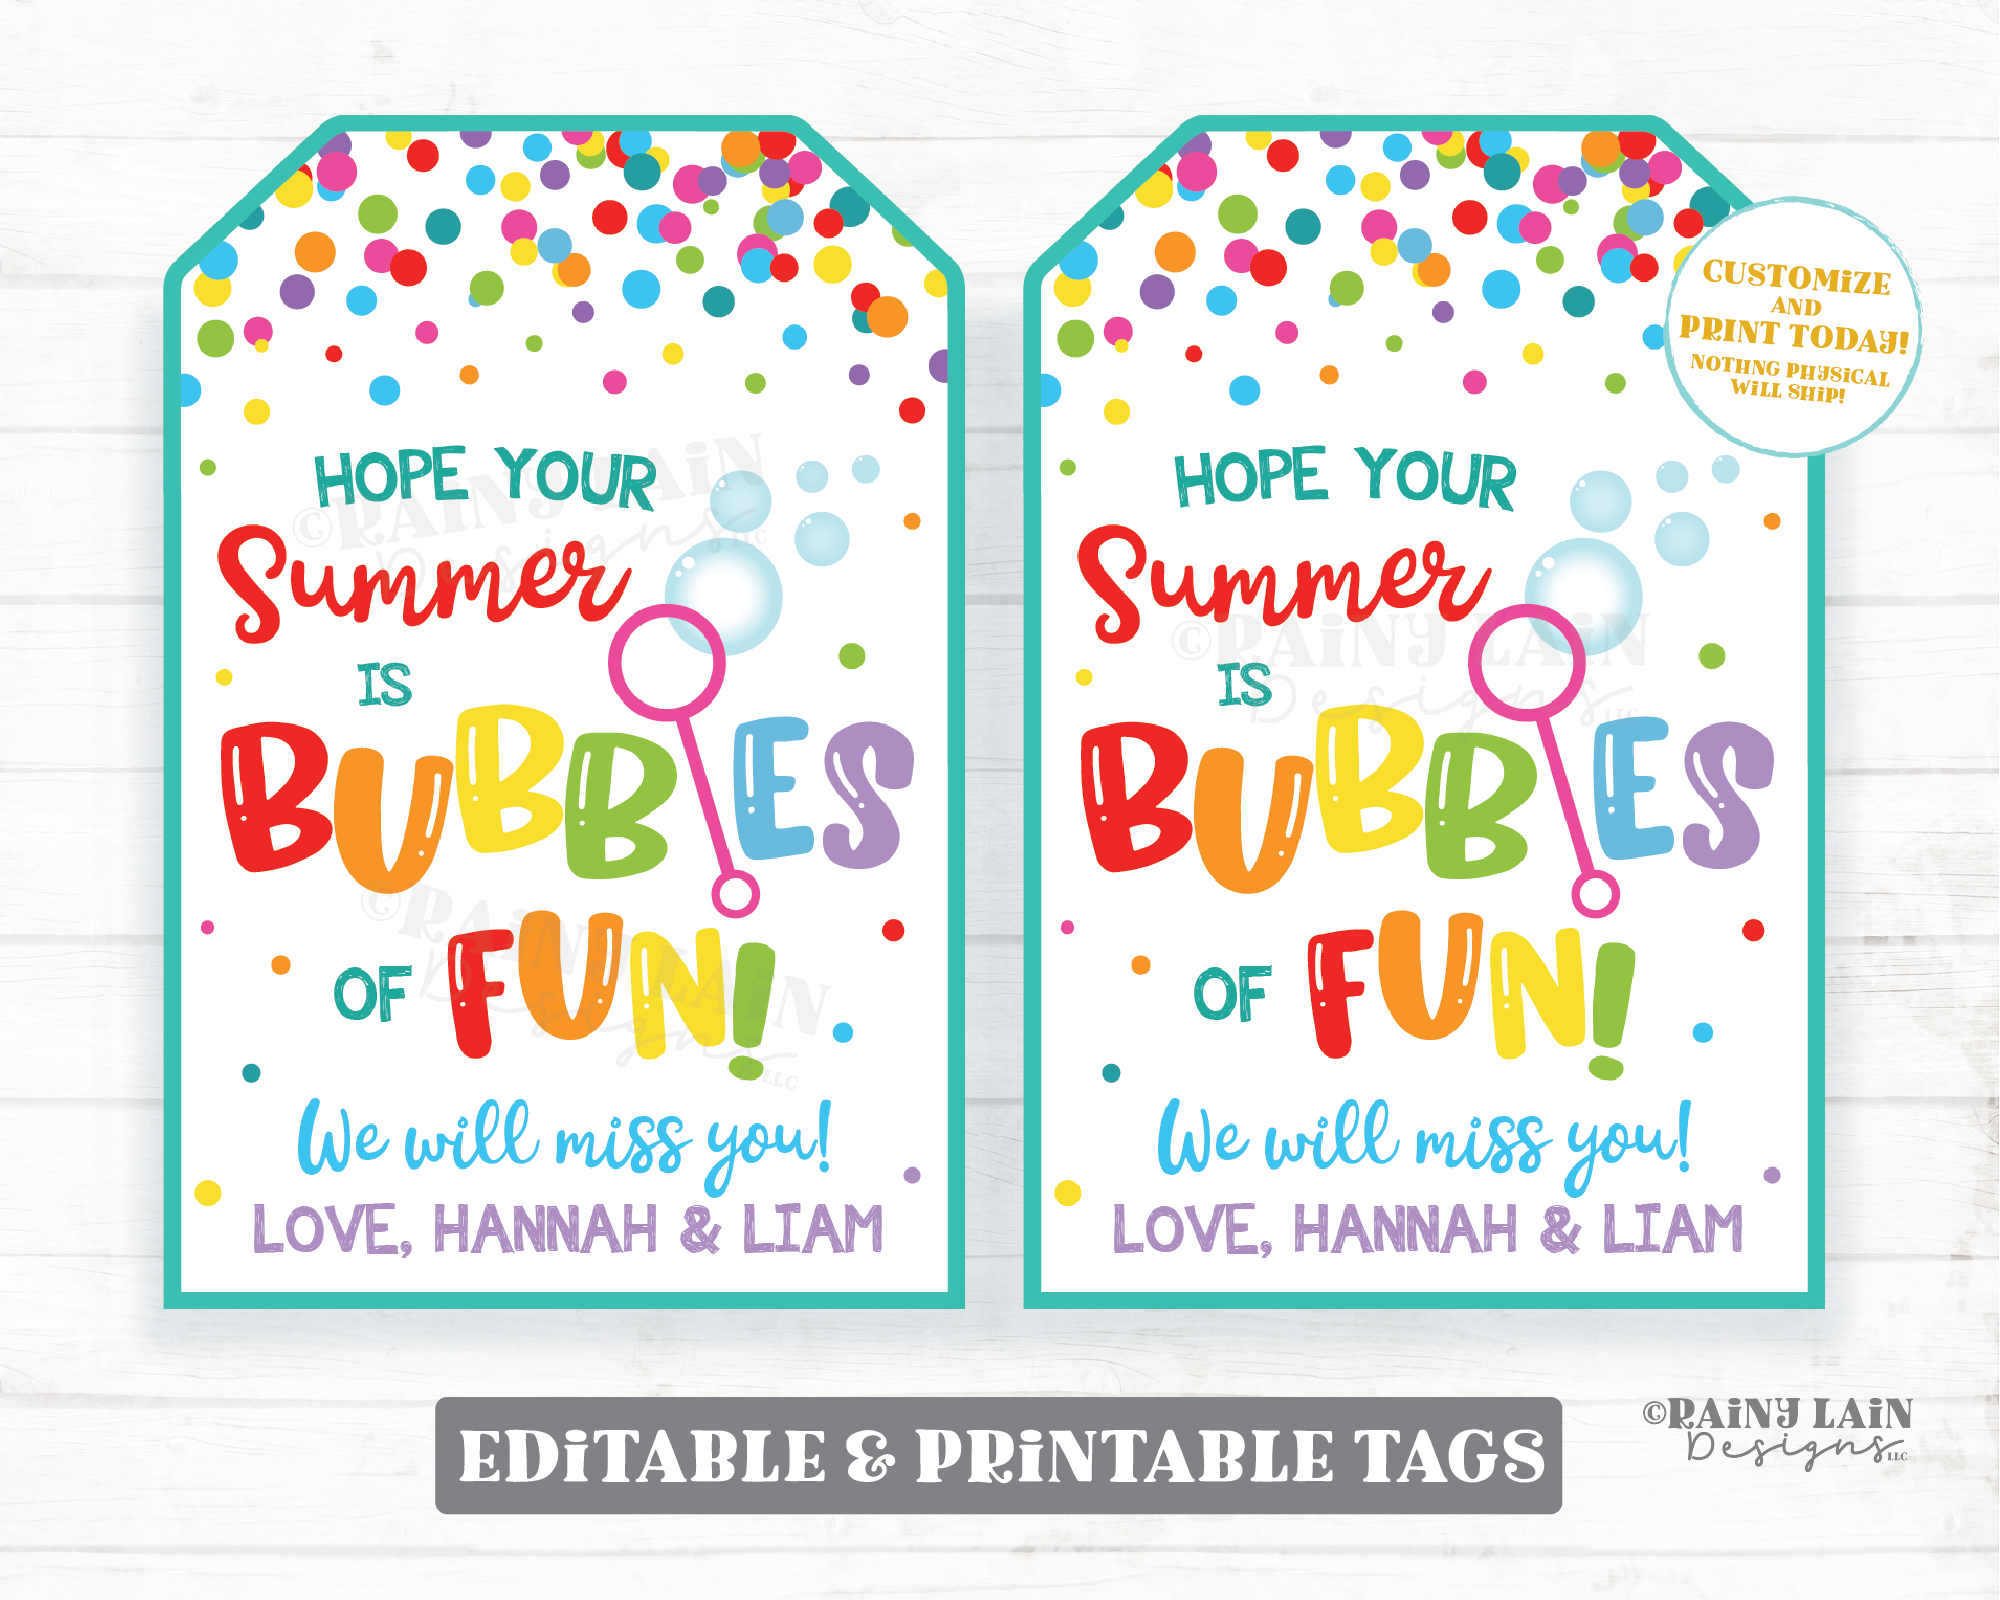 Hope Your Summer Bubbles With Fun Free Printable Tags